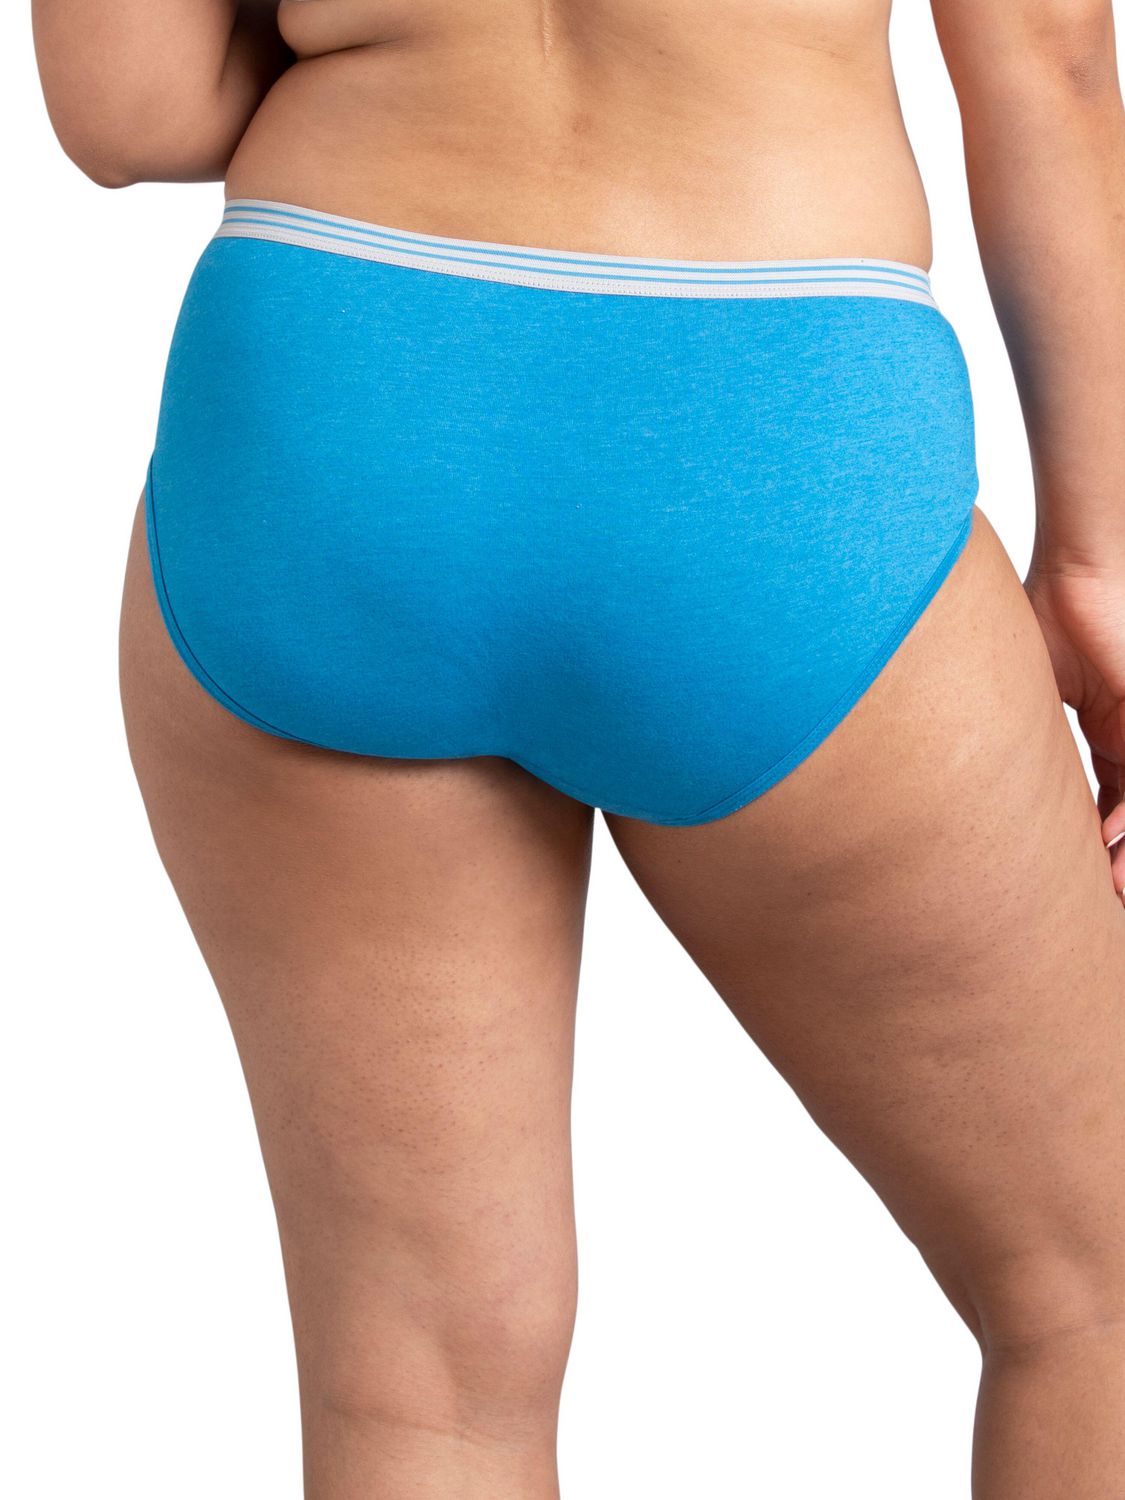 The Nerves of Teal | Teal Heather Cheeky Underwear